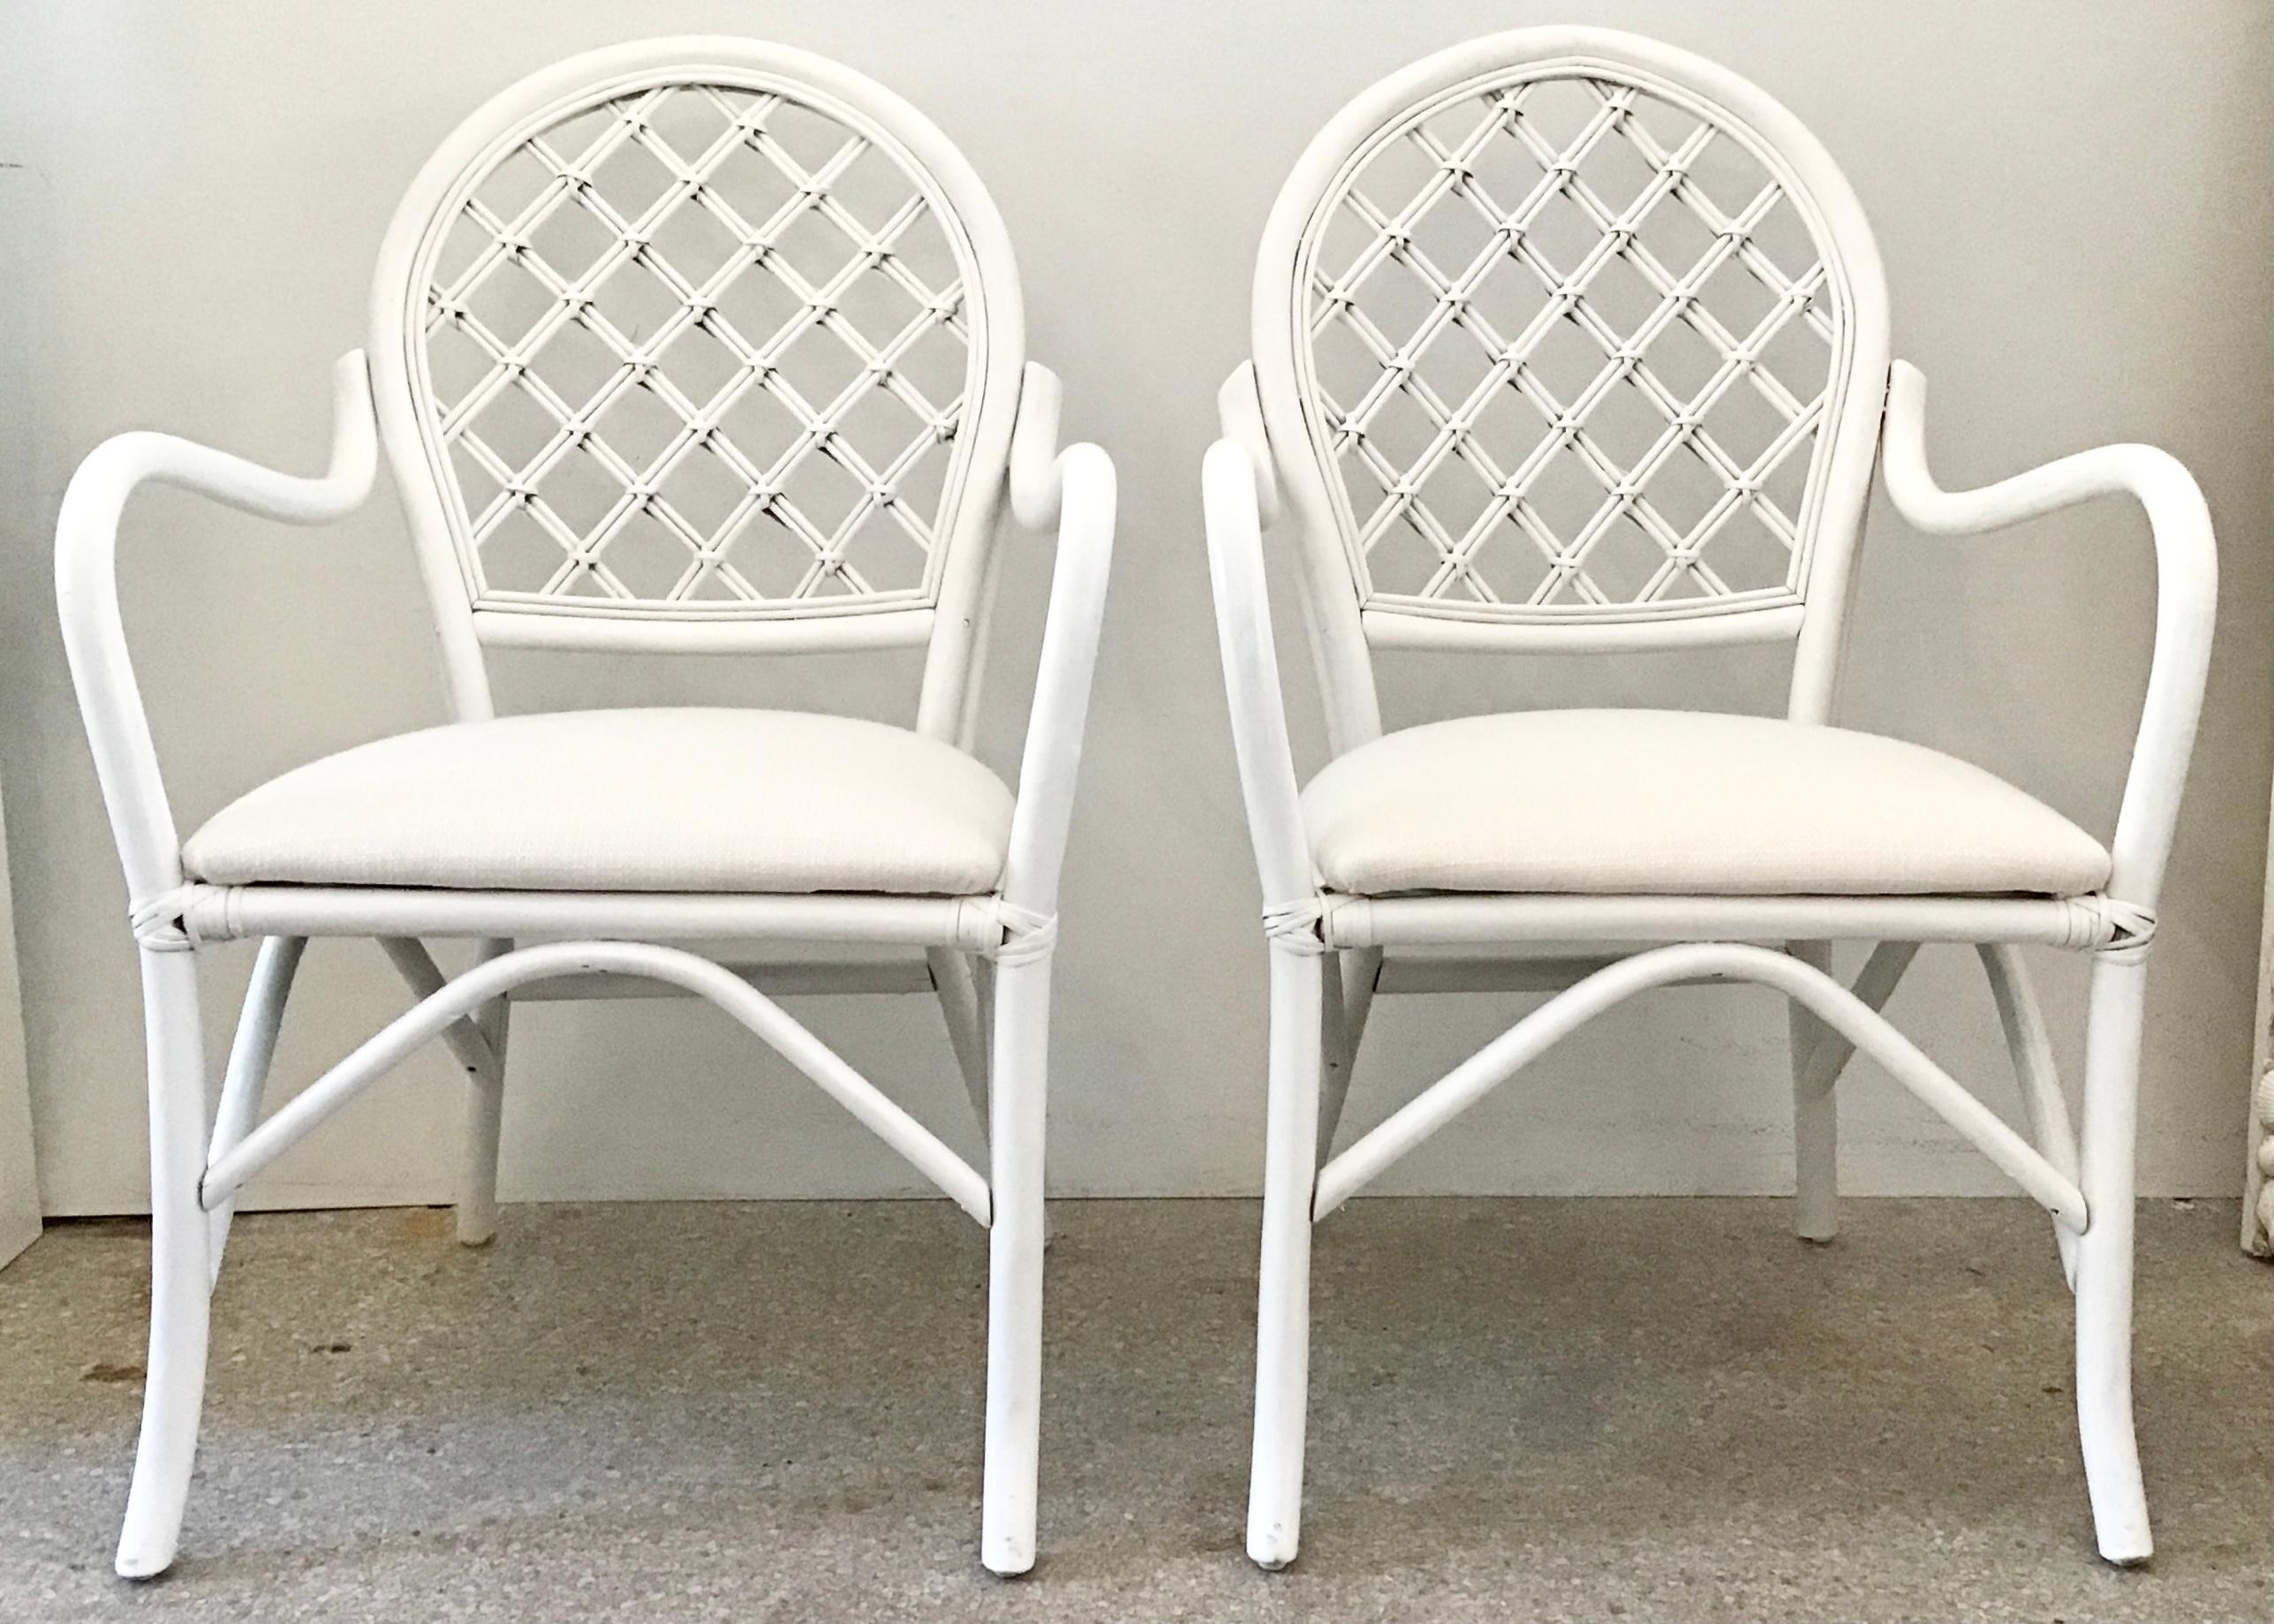 Fabulous pair of Ficks Reed arm chairs with new Todd Hase upholstery. Would make a great addition to your boho chic inspired home.